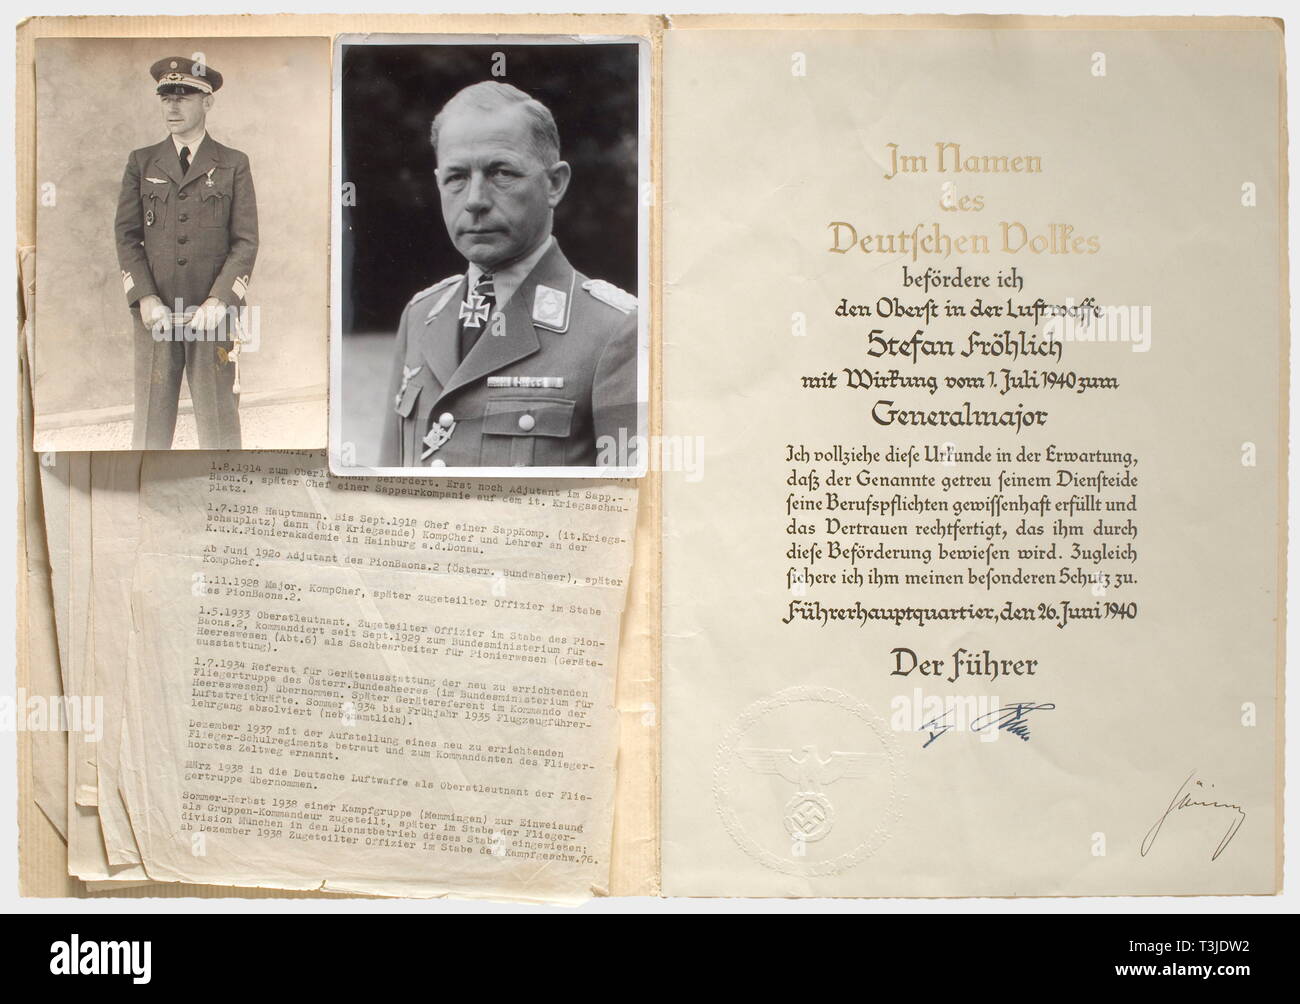 General der Flieger Stefan Fröhlich (1889 - 1978), his 1940 certificate for his promotion to the rank of Generalmajor and a photo album Gold-stamped, printed, and calligraphically embellished double sheet with Hitler's facsimile signature, Görings ink signature, and blind-stamped seal, people, 1930s, 20th century, Air Force, branch of service, branches of service, armed service, armed services, military, militaria, air forces, object, objects, stills, clipping, clippings, cut out, cut-out, cut-outs, document, documents, man, men, male, Editorial-Use-Only Stock Photo